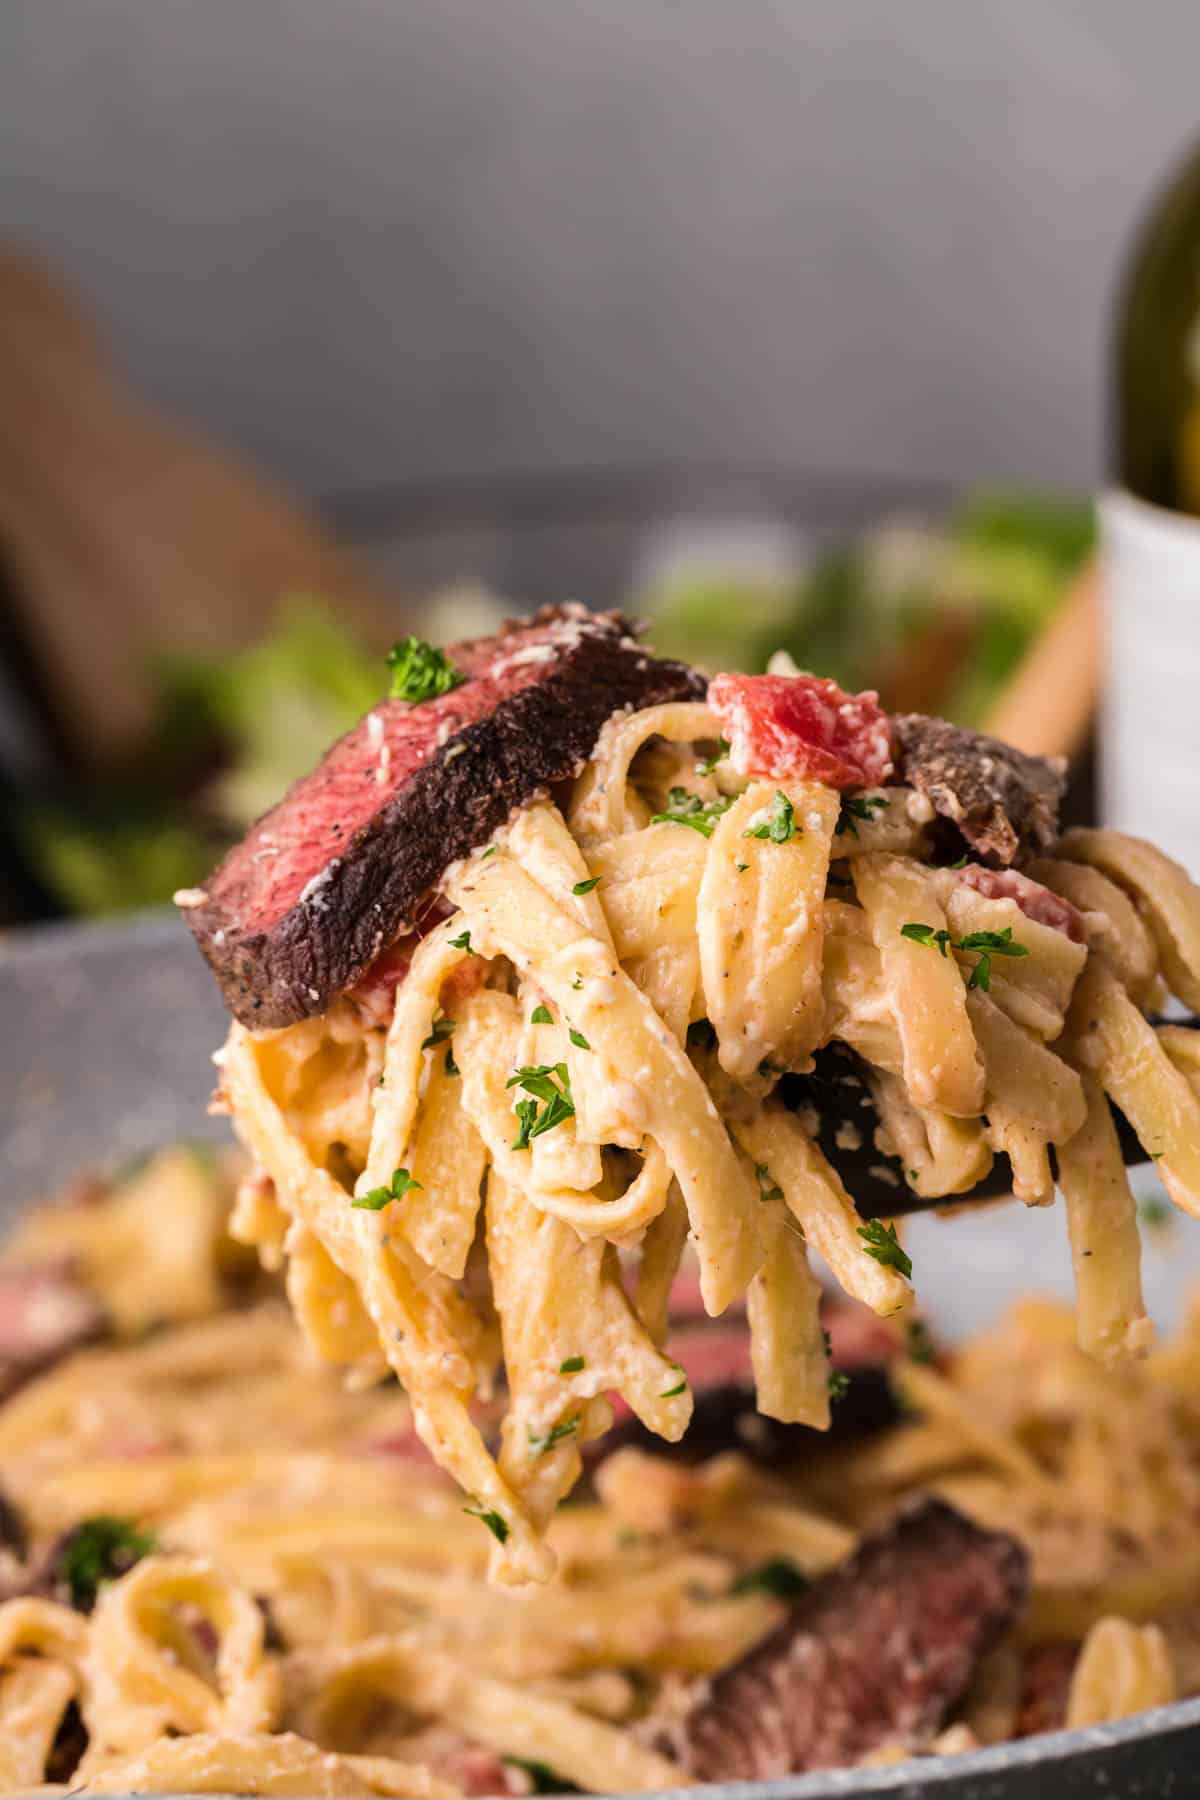 A spoonful of fettuccine alfredo noodles and sliced steak being lifted out of the pan.